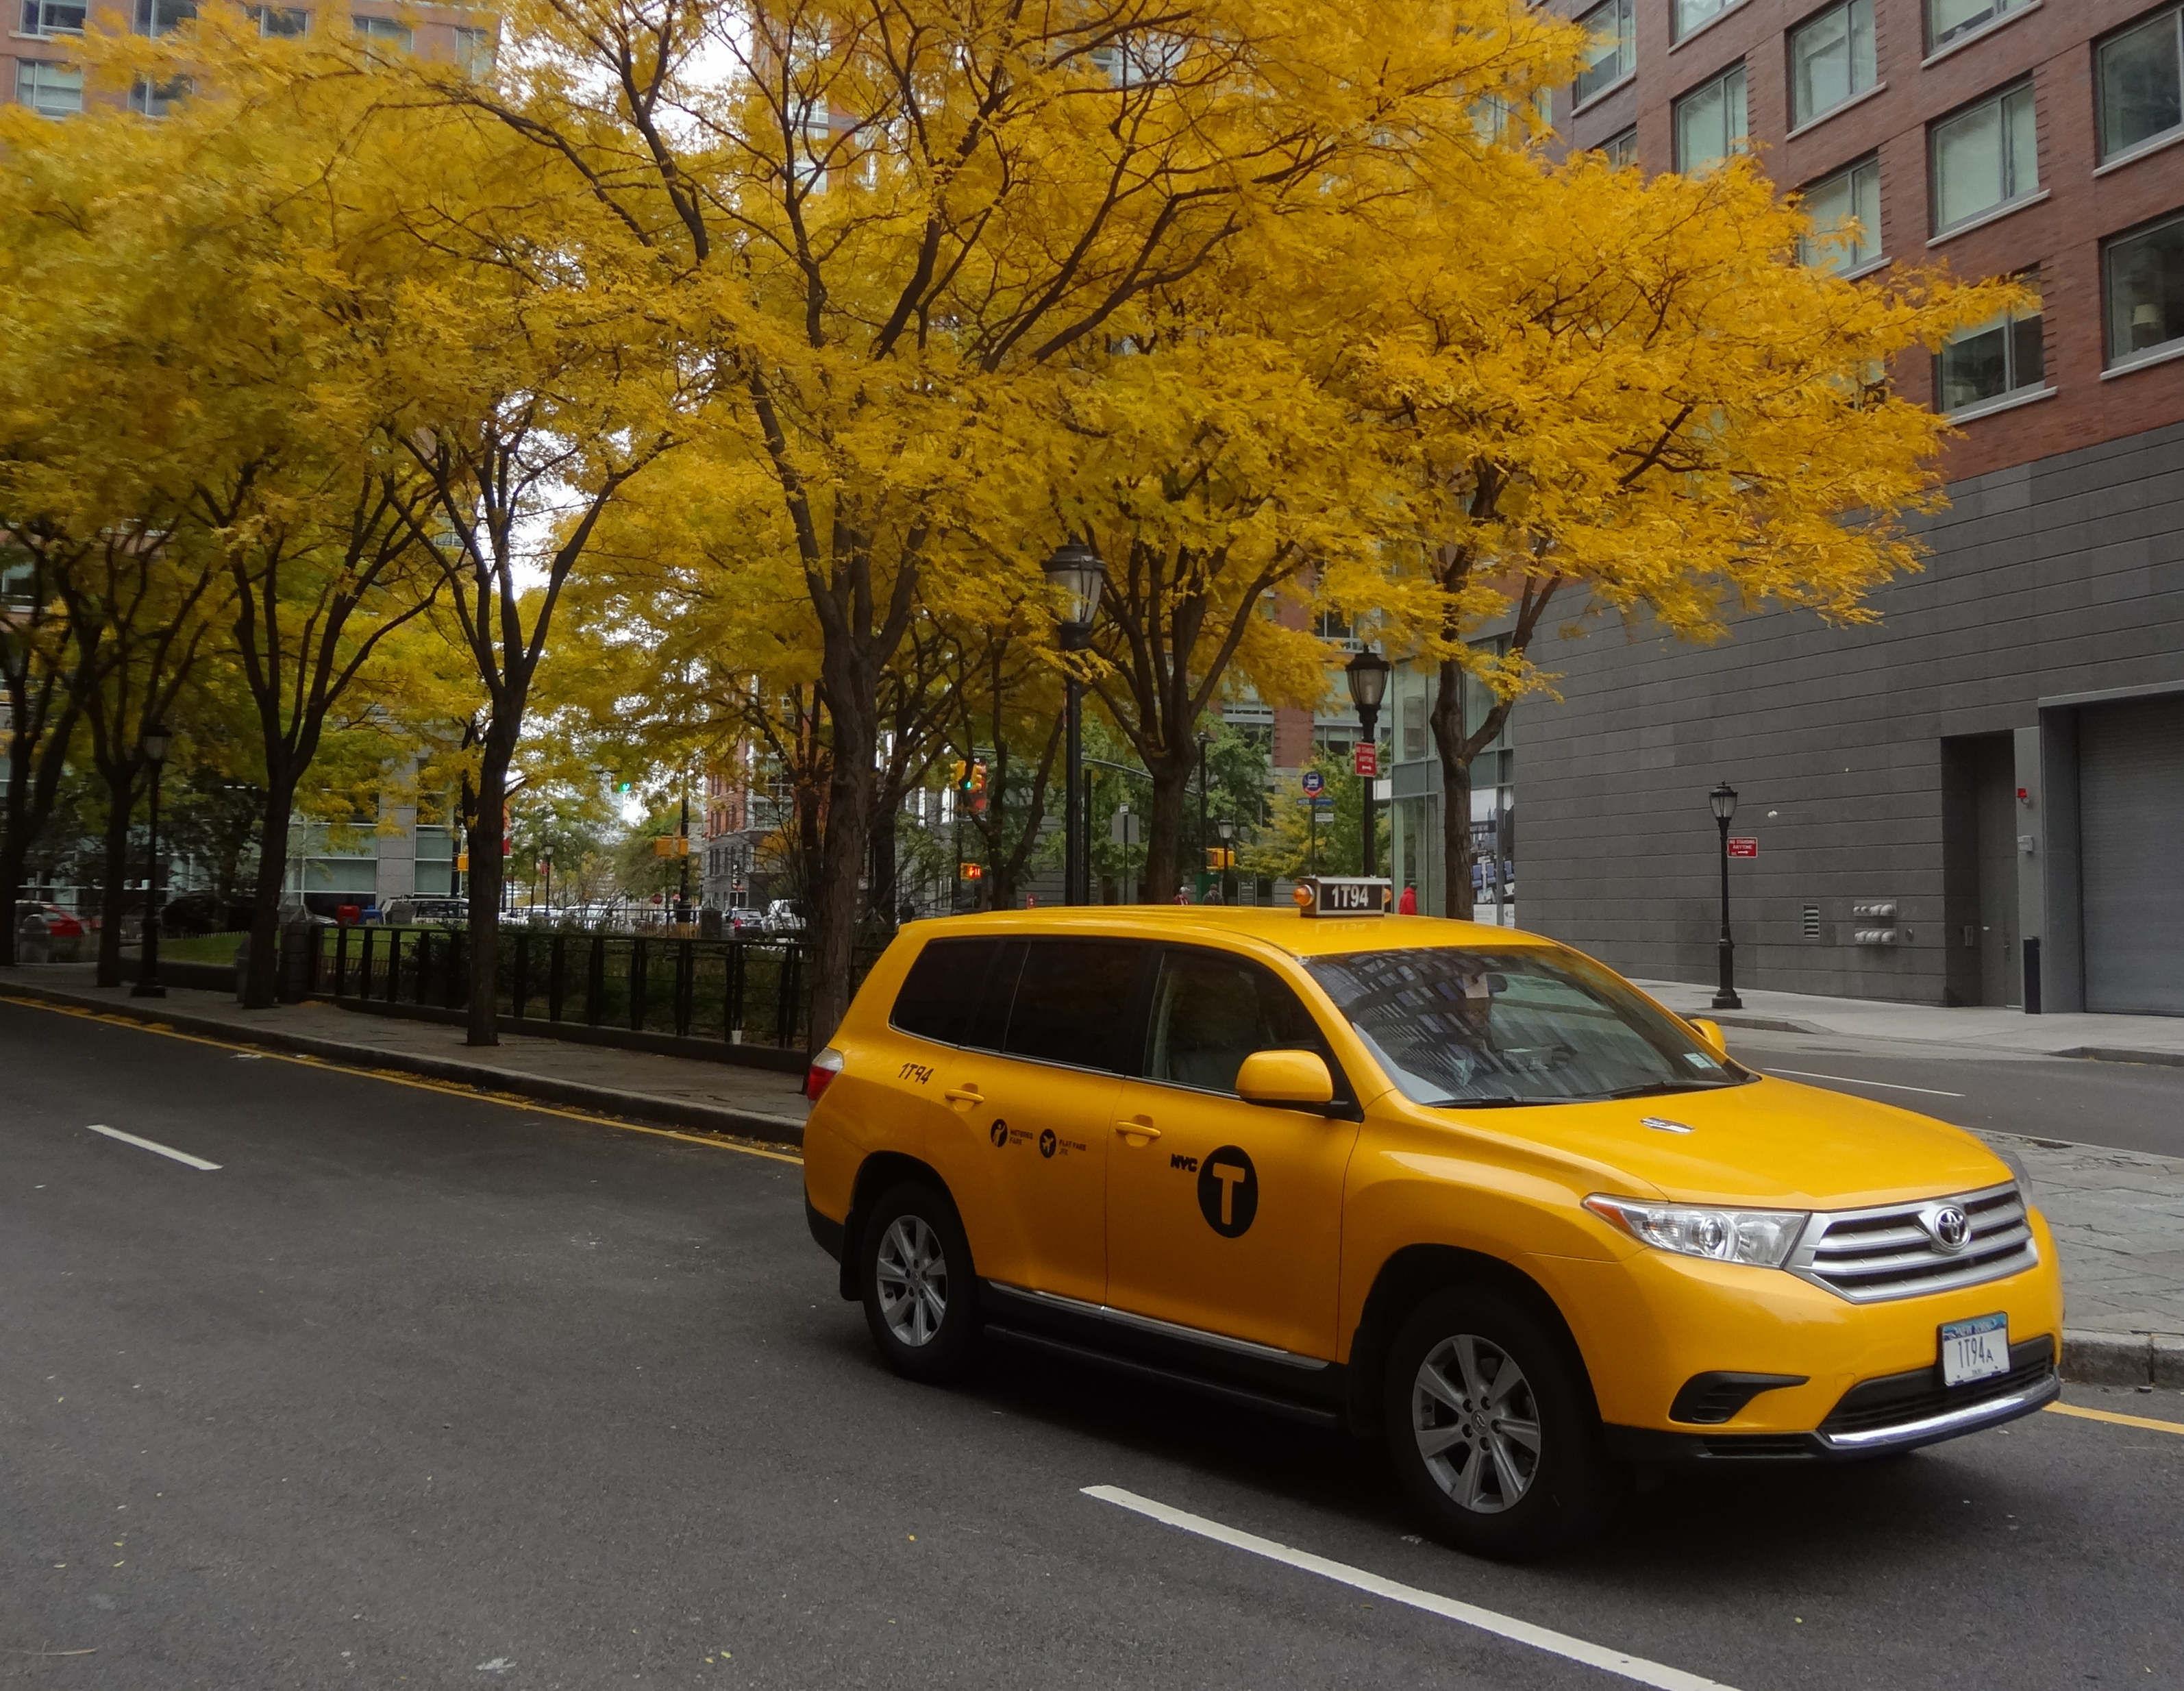 Yellow taxi and locust trees